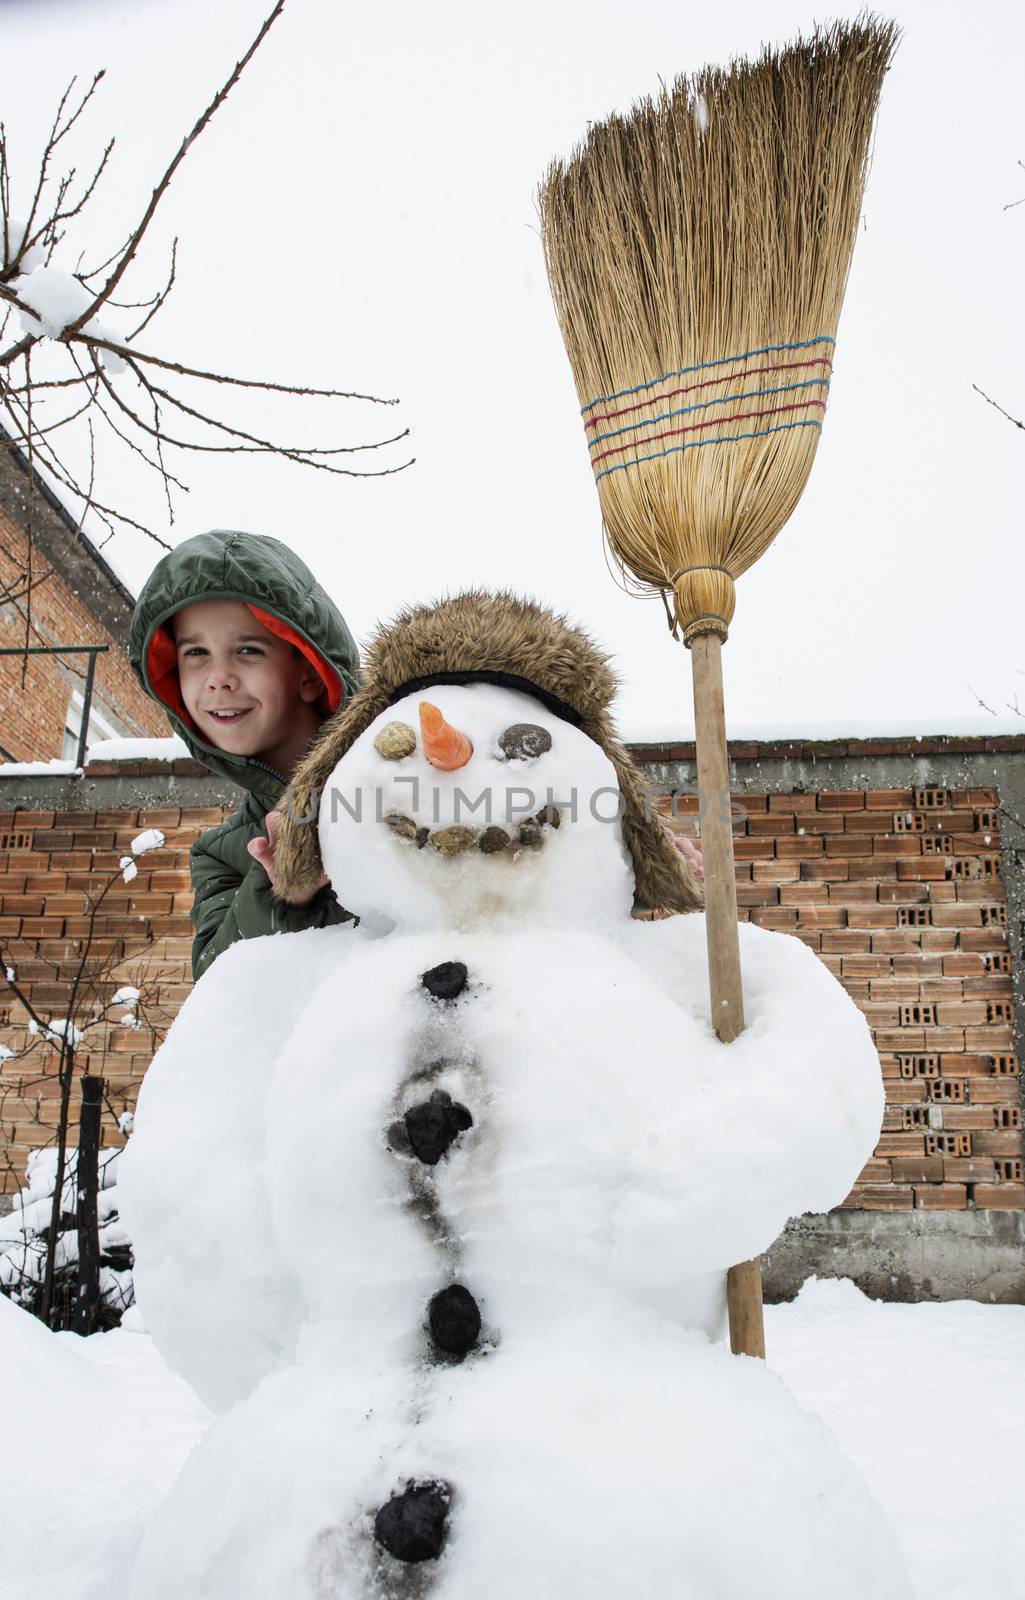 Snowman and child in the yard. Winter